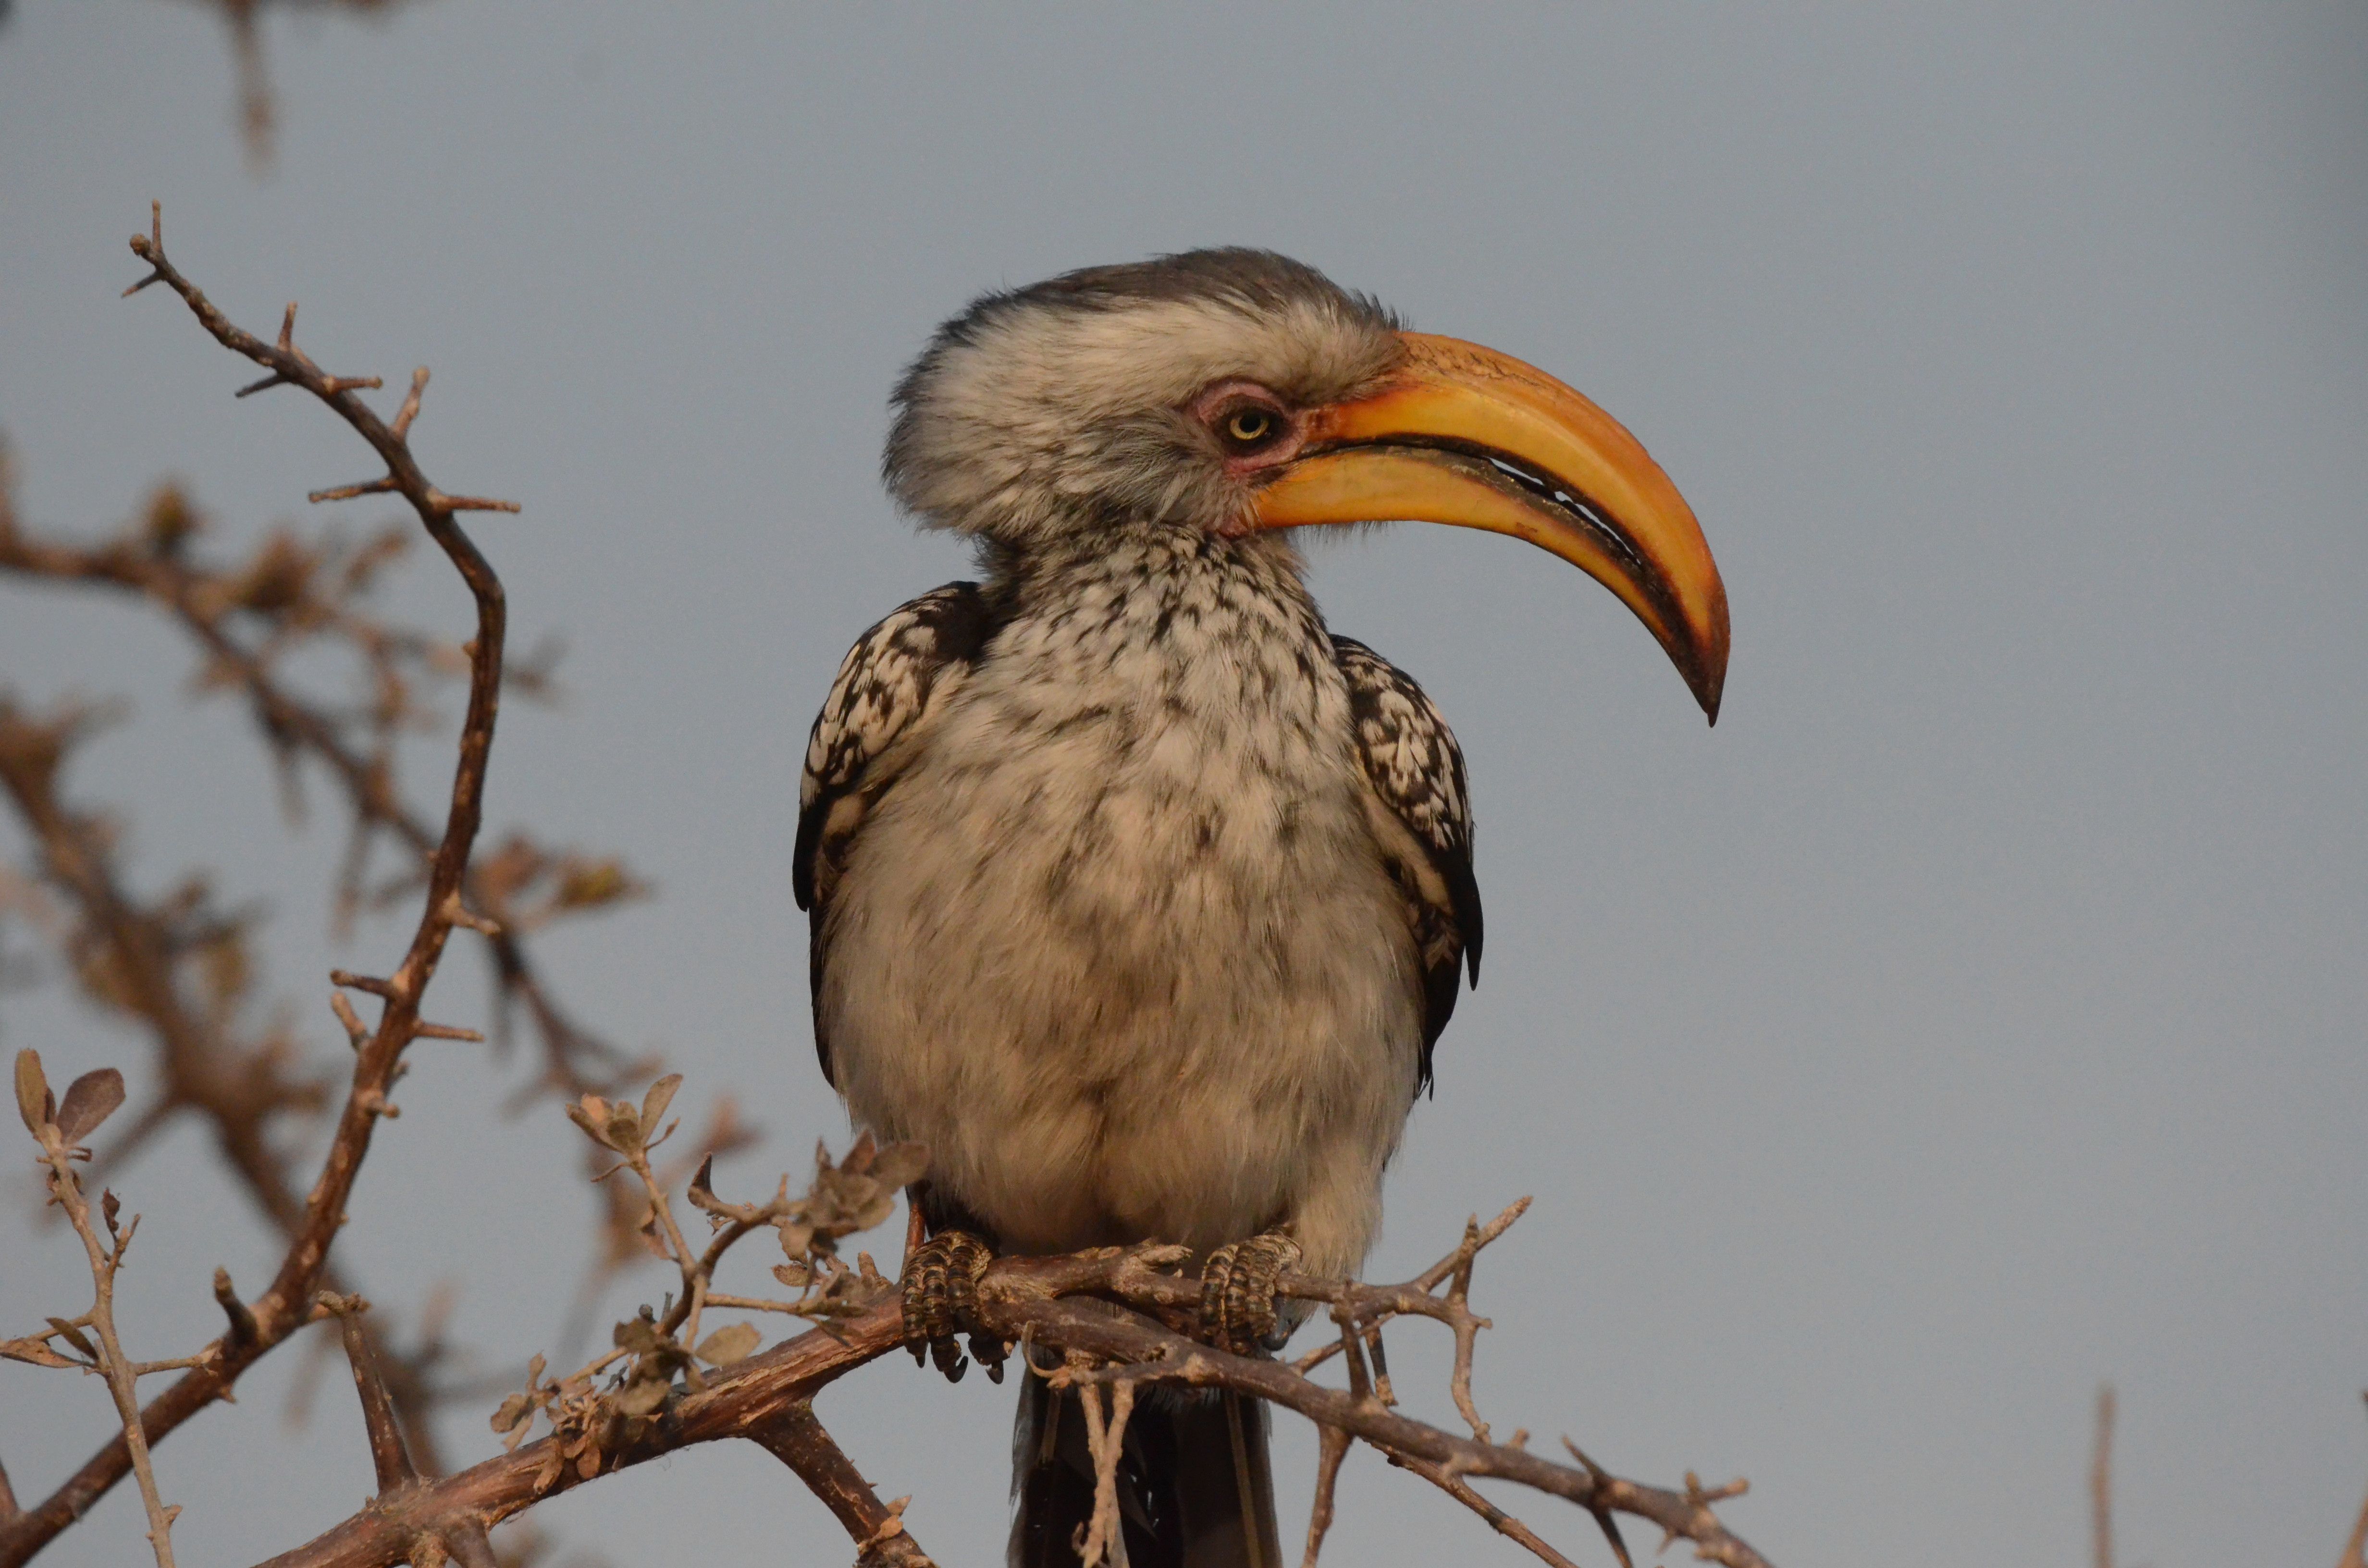 Click picture to see more SSouthernYellow-billedHornbills.